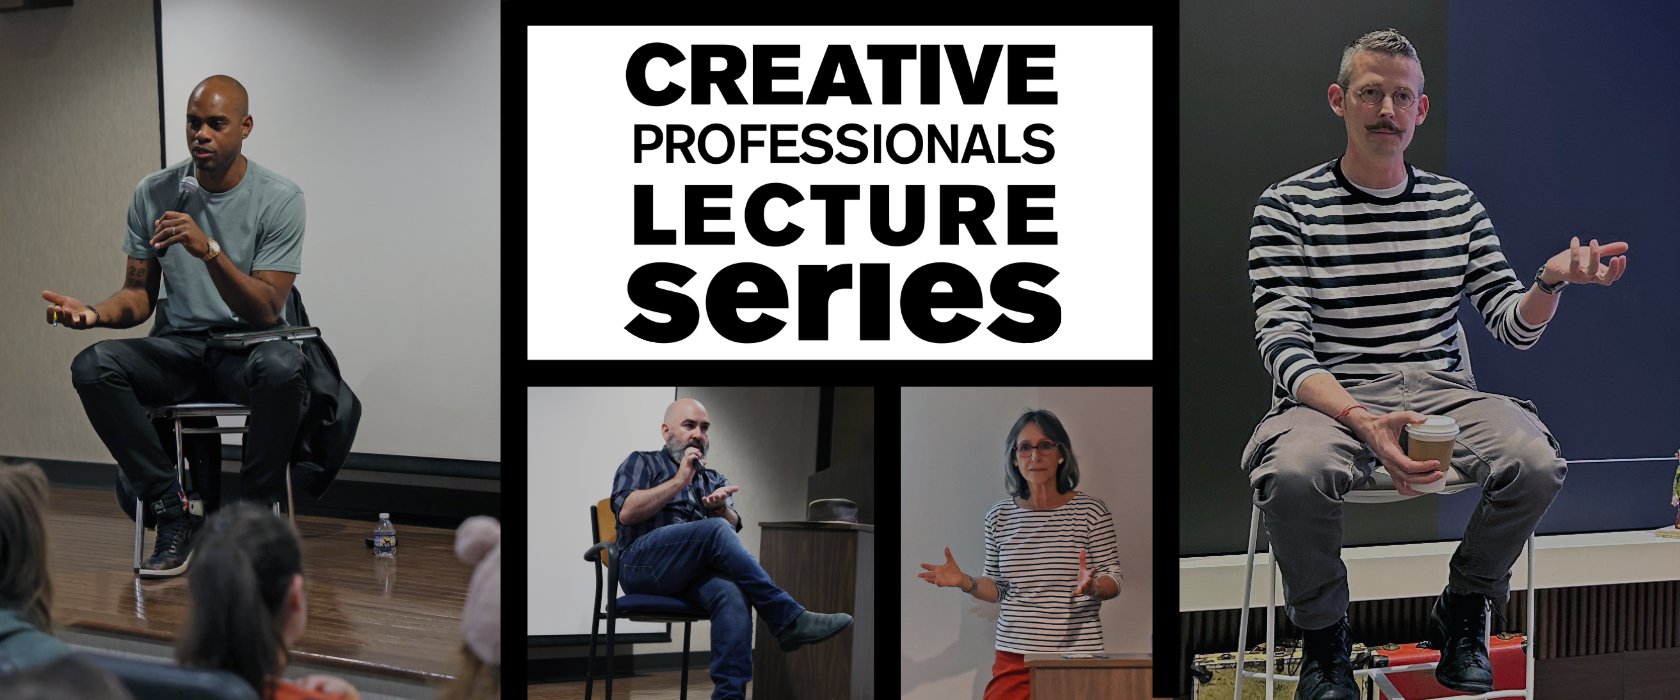 Creative Professionals Lecture Series